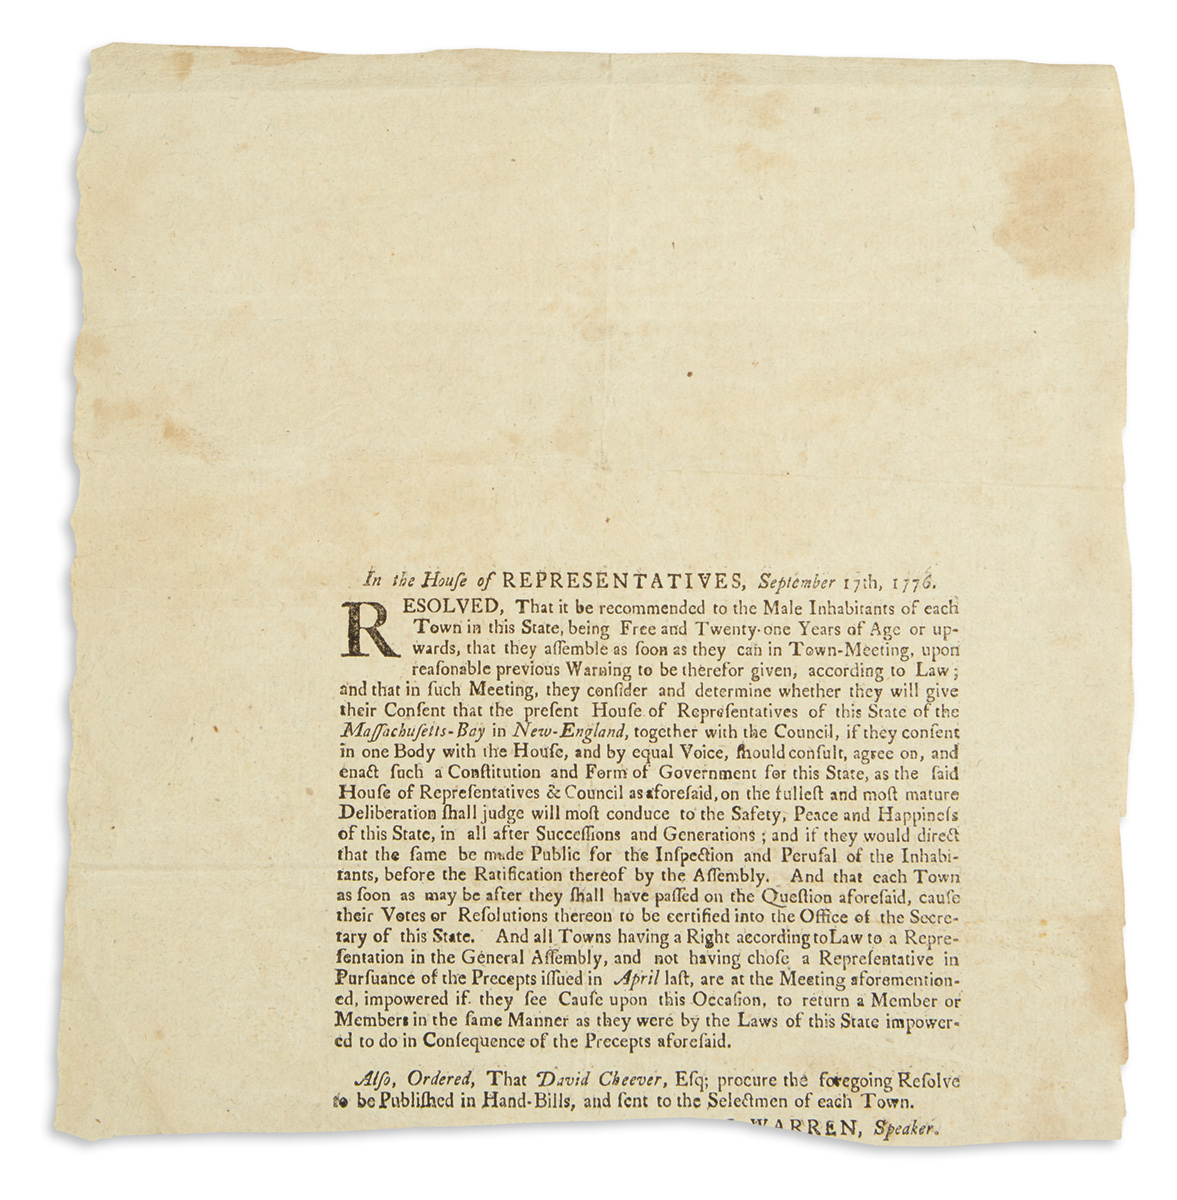 (AMERICAN REVOLUTION--1776.) A resolution to begin work on a new constitution for the state of Massachusetts.